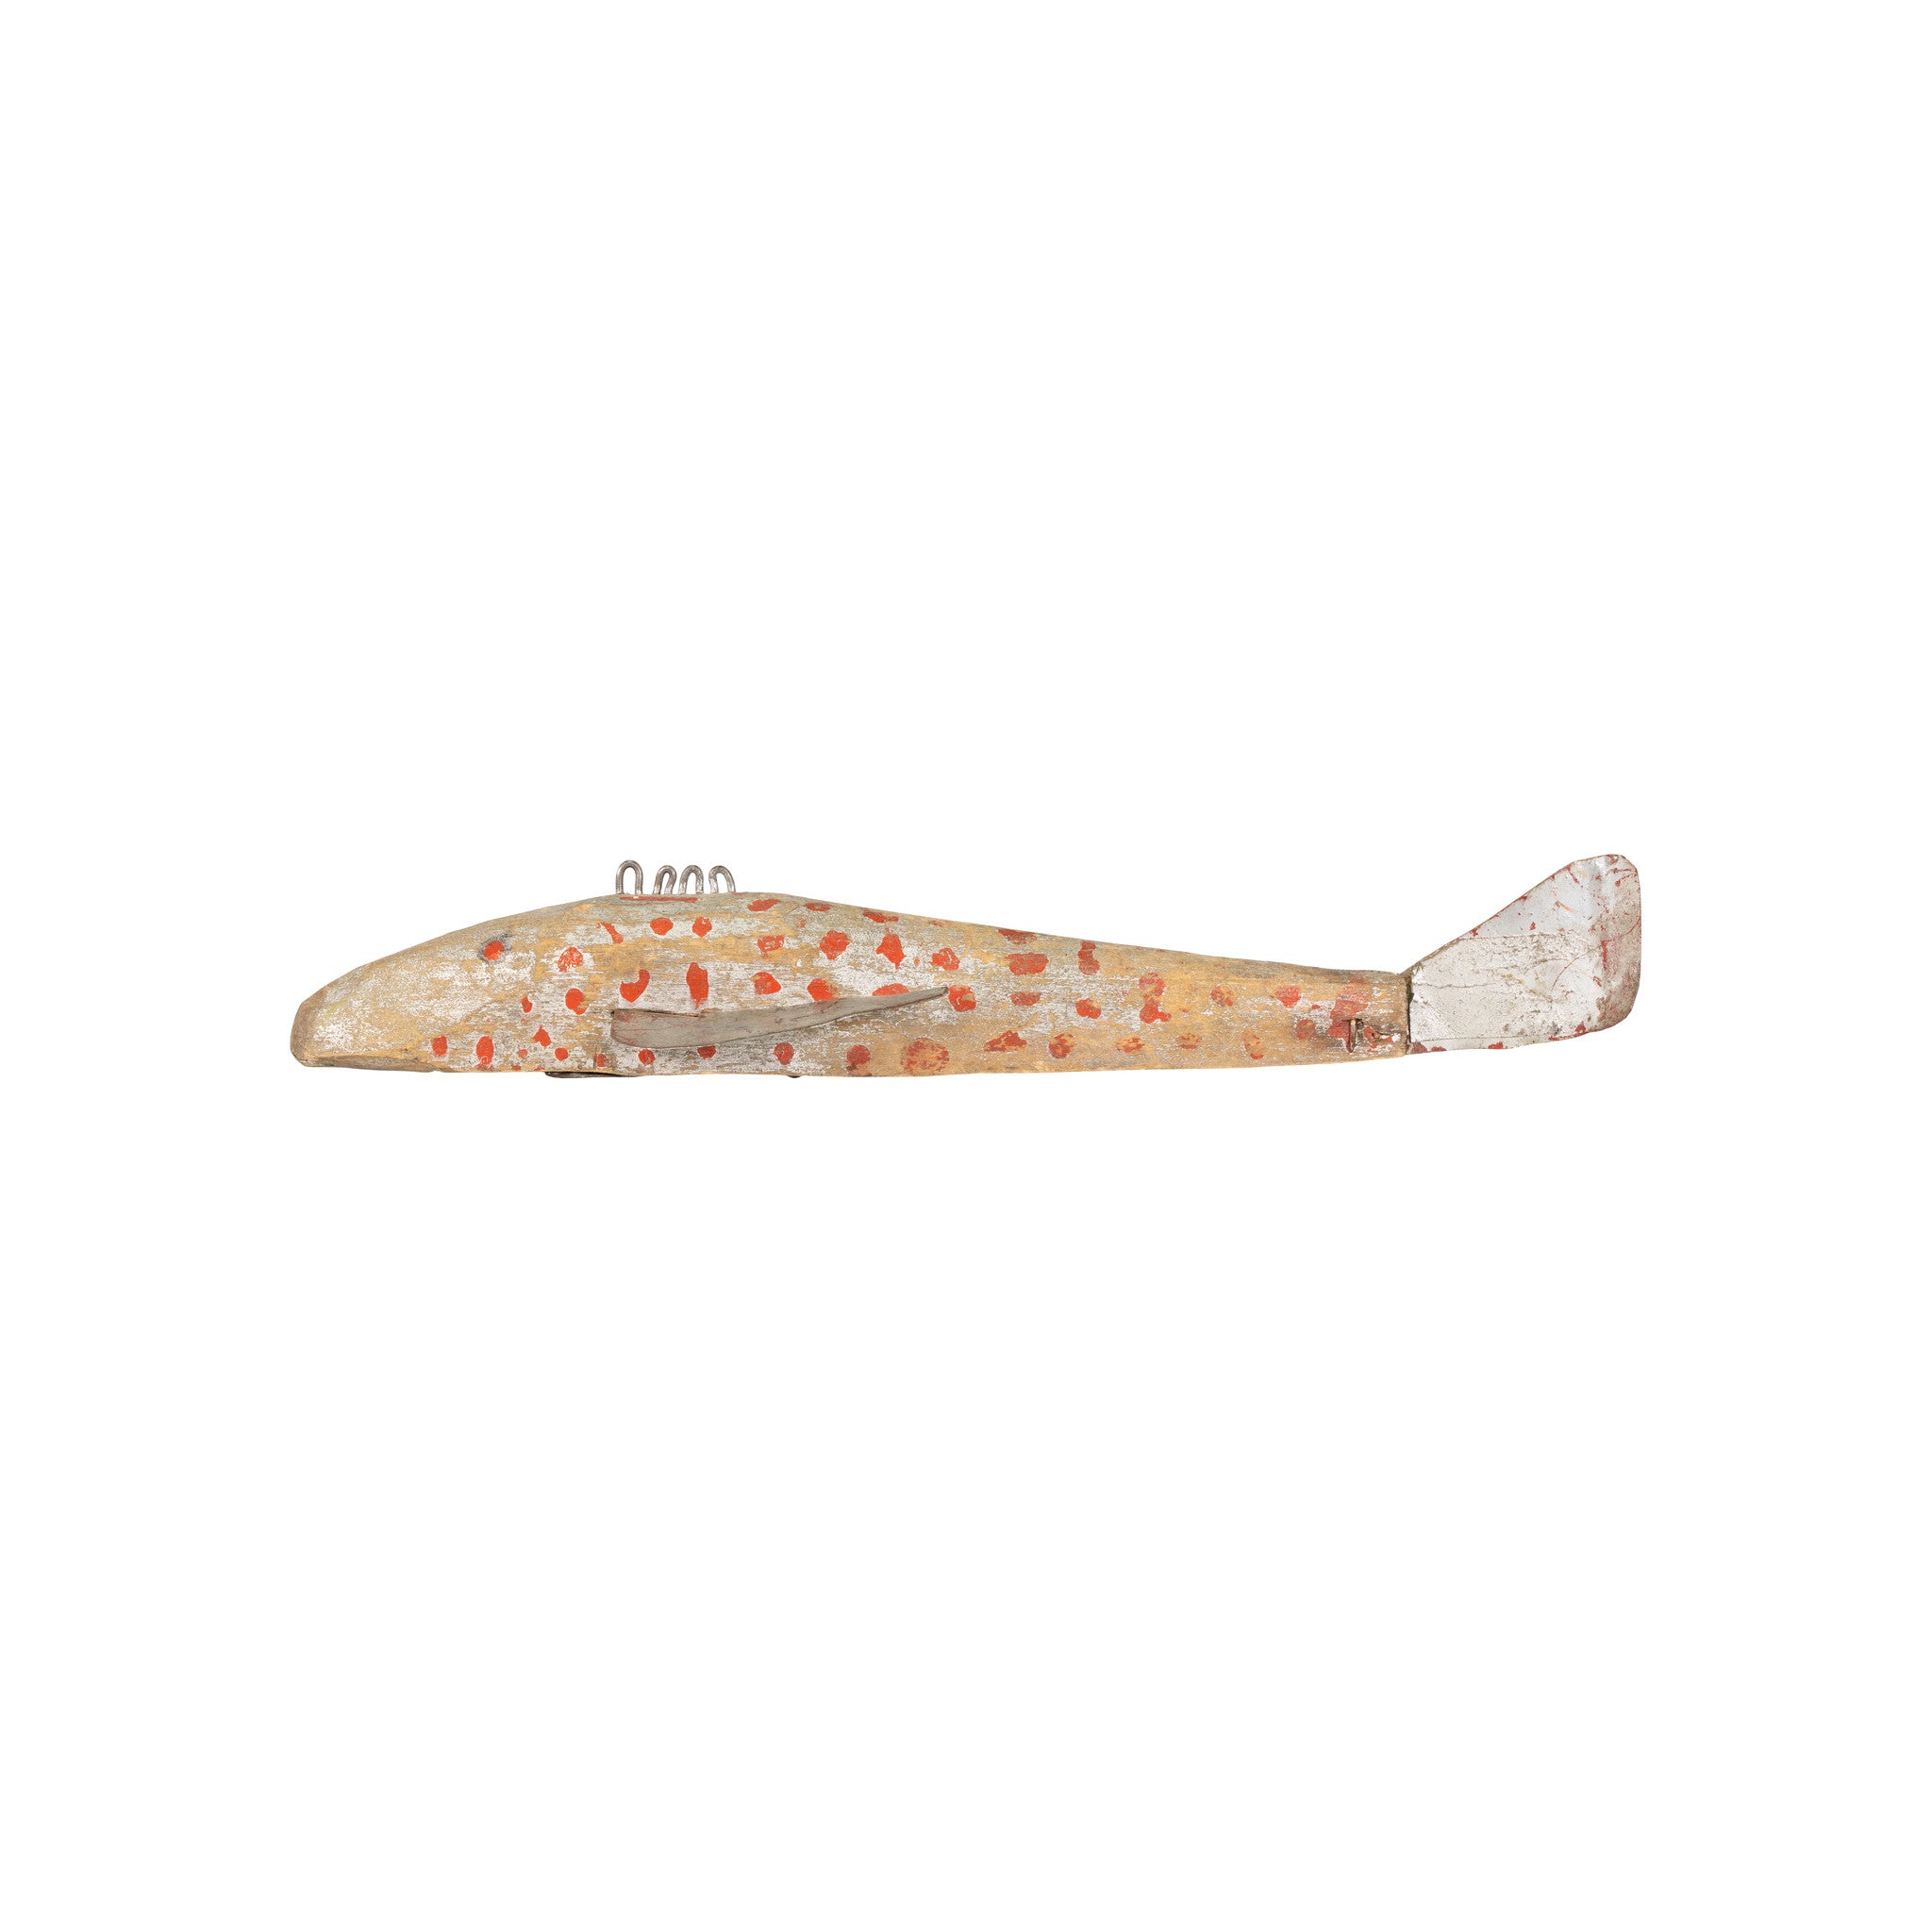 Spearfish Decoy Silver with Red Spots